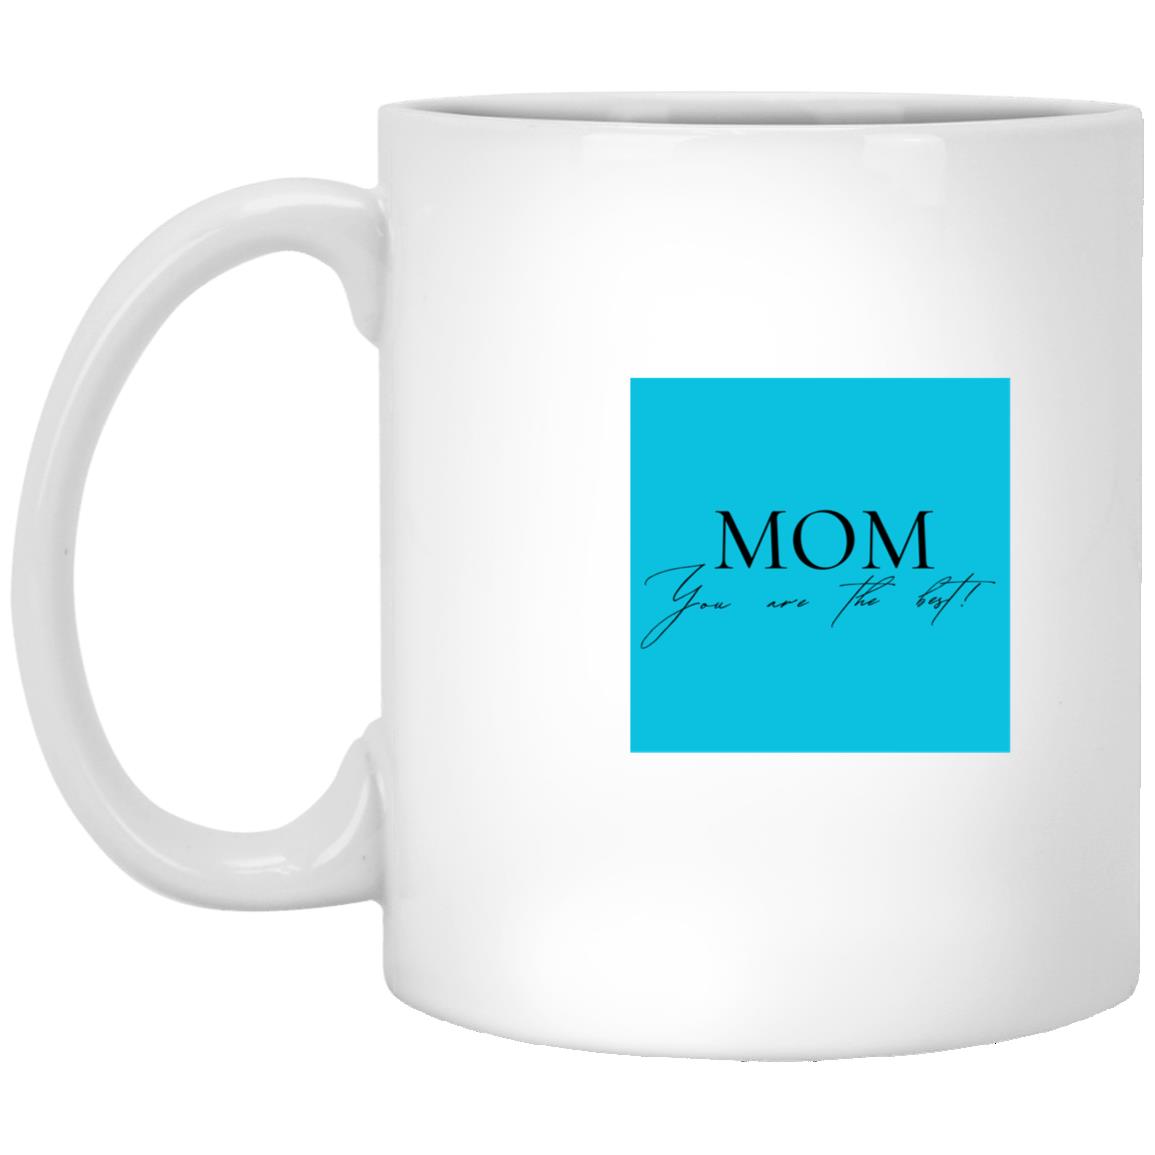 Mom You are the Best -  White Mug Style 34